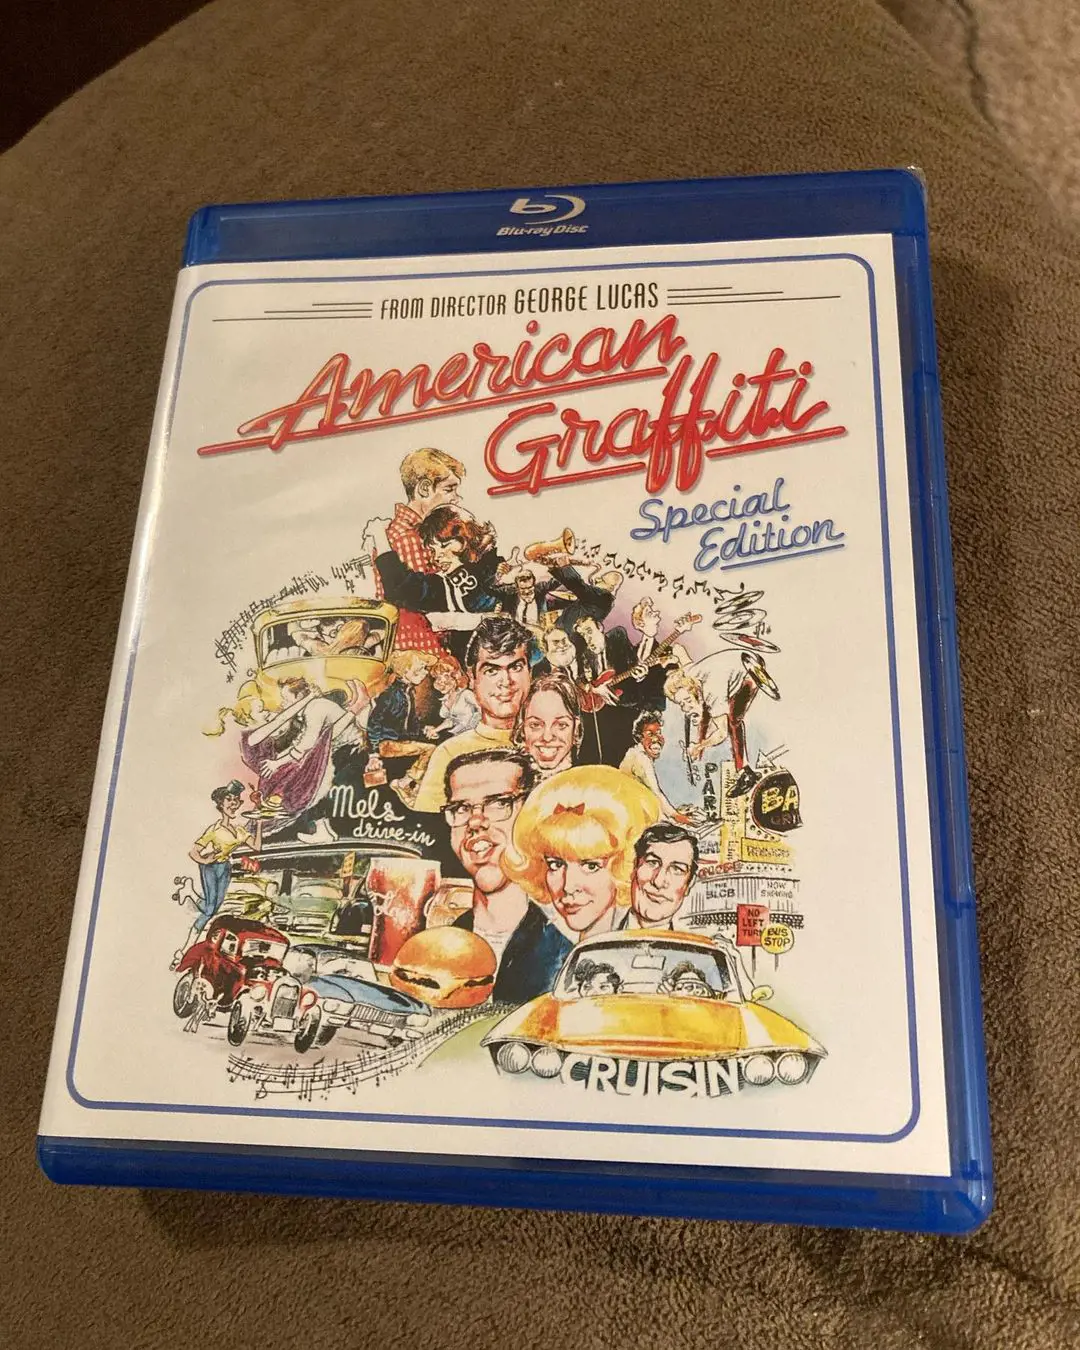 American Graffiti is also one of the greatest rock and roll movie to exist